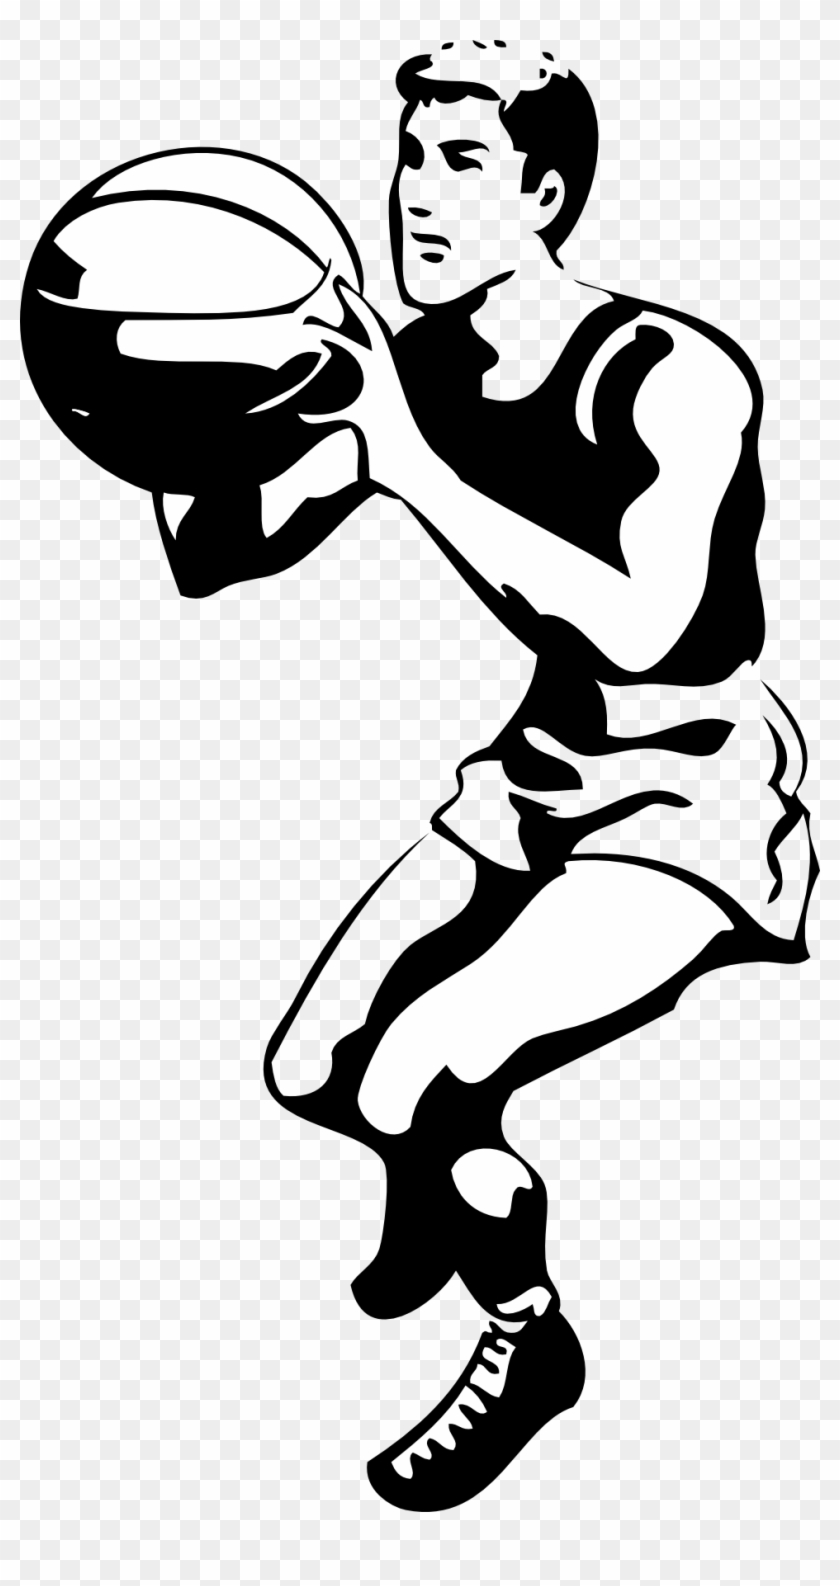 Black And White Basketball Clipart - Basketball Player Clip Art #54403